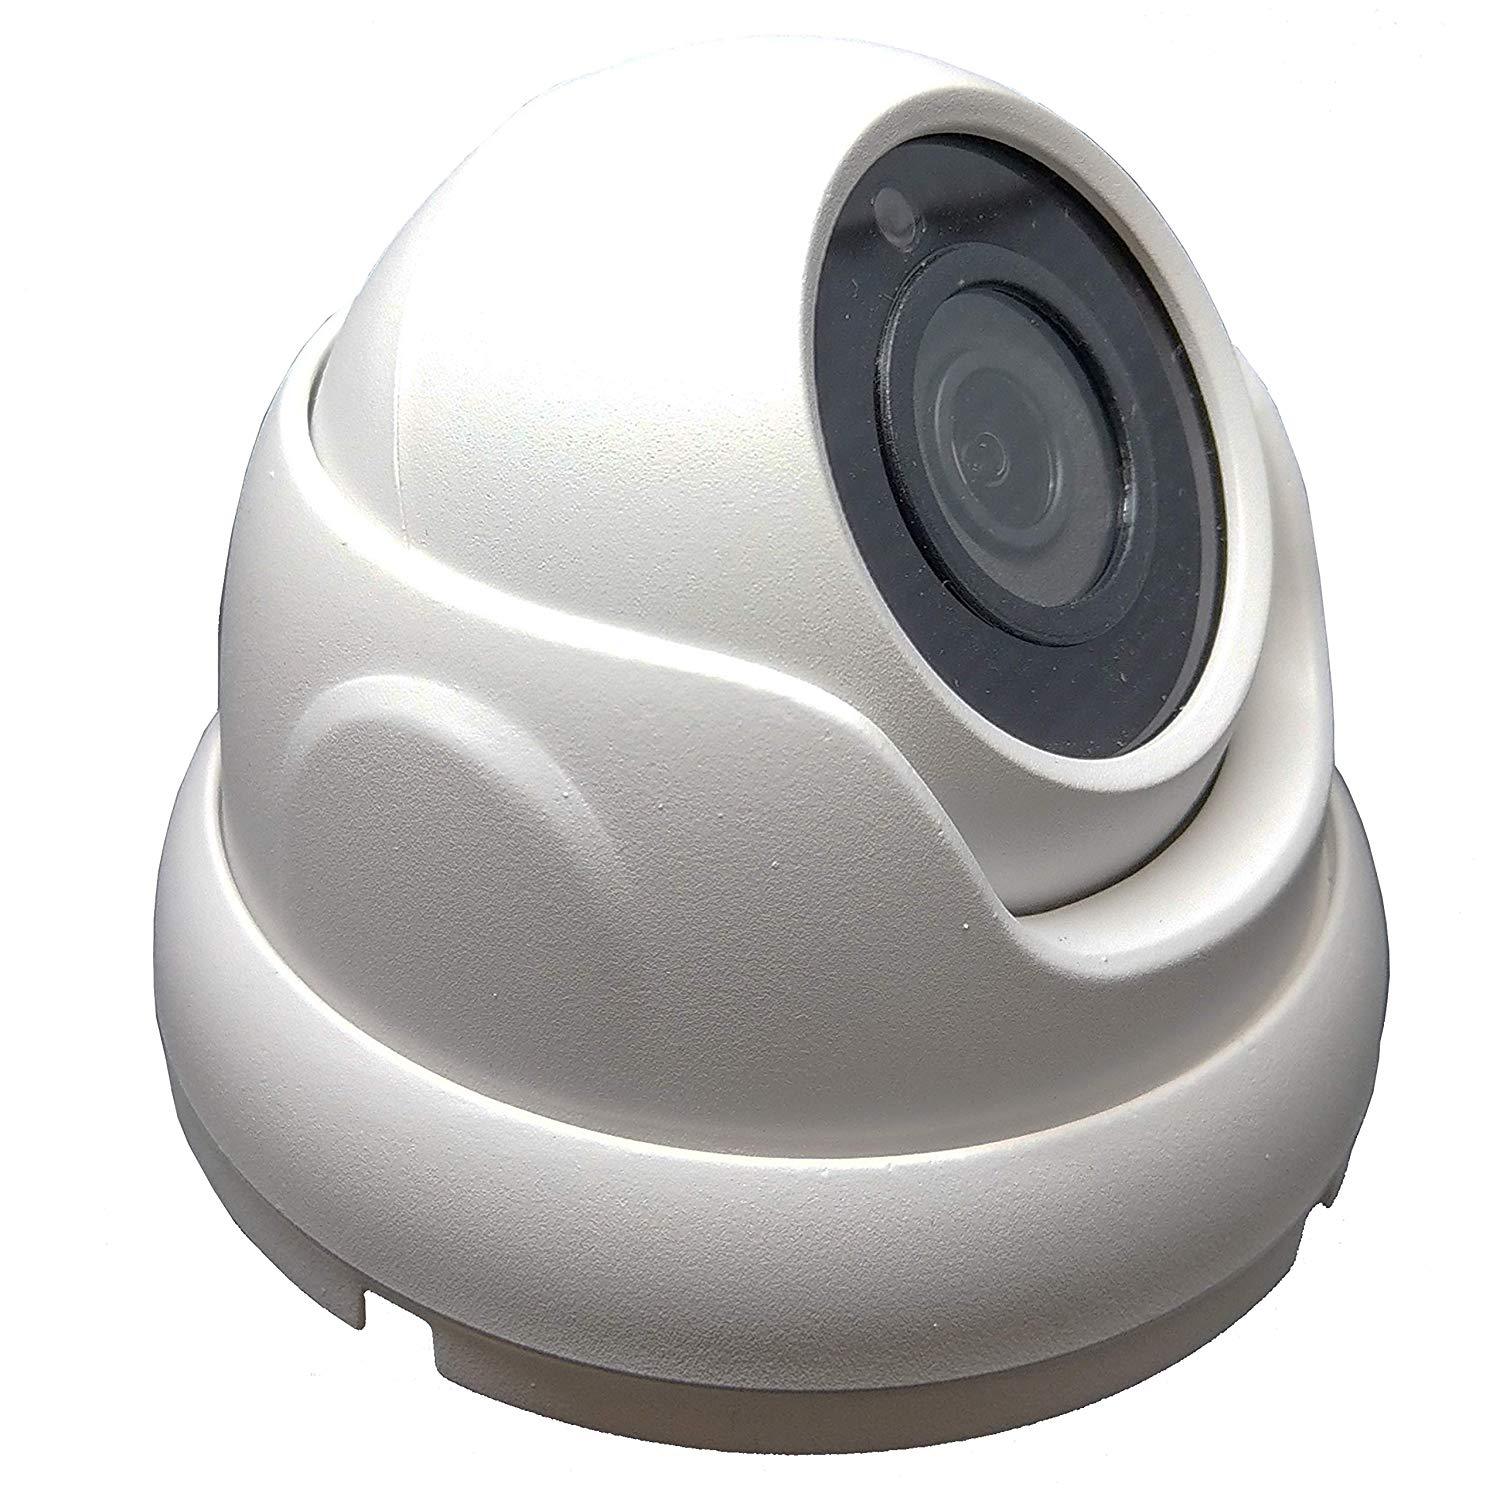 2MP Full HD True WDR PoE IP Dome Camera 2.8mm Fixed Lens  WideAngle Lens Onvif IR Night Vision Weatherproof Best for Home/Business Security 3 Year Warranty (White) - 101AVInc.